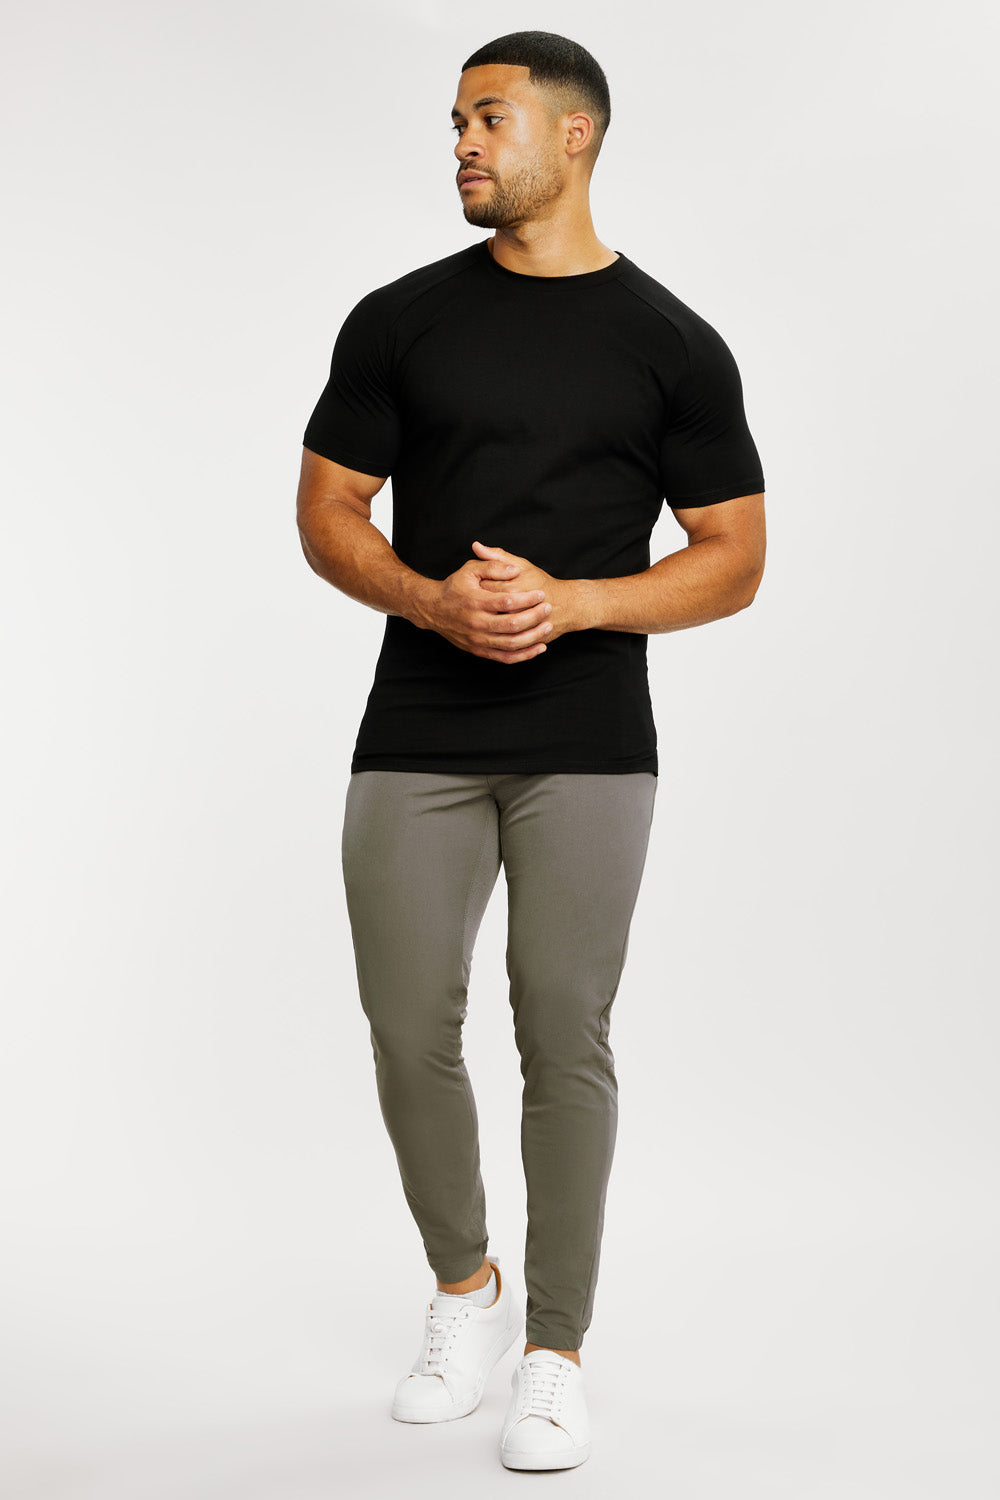 Everyday Tech Trousers in Olive - TAILORED ATHLETE - ROW